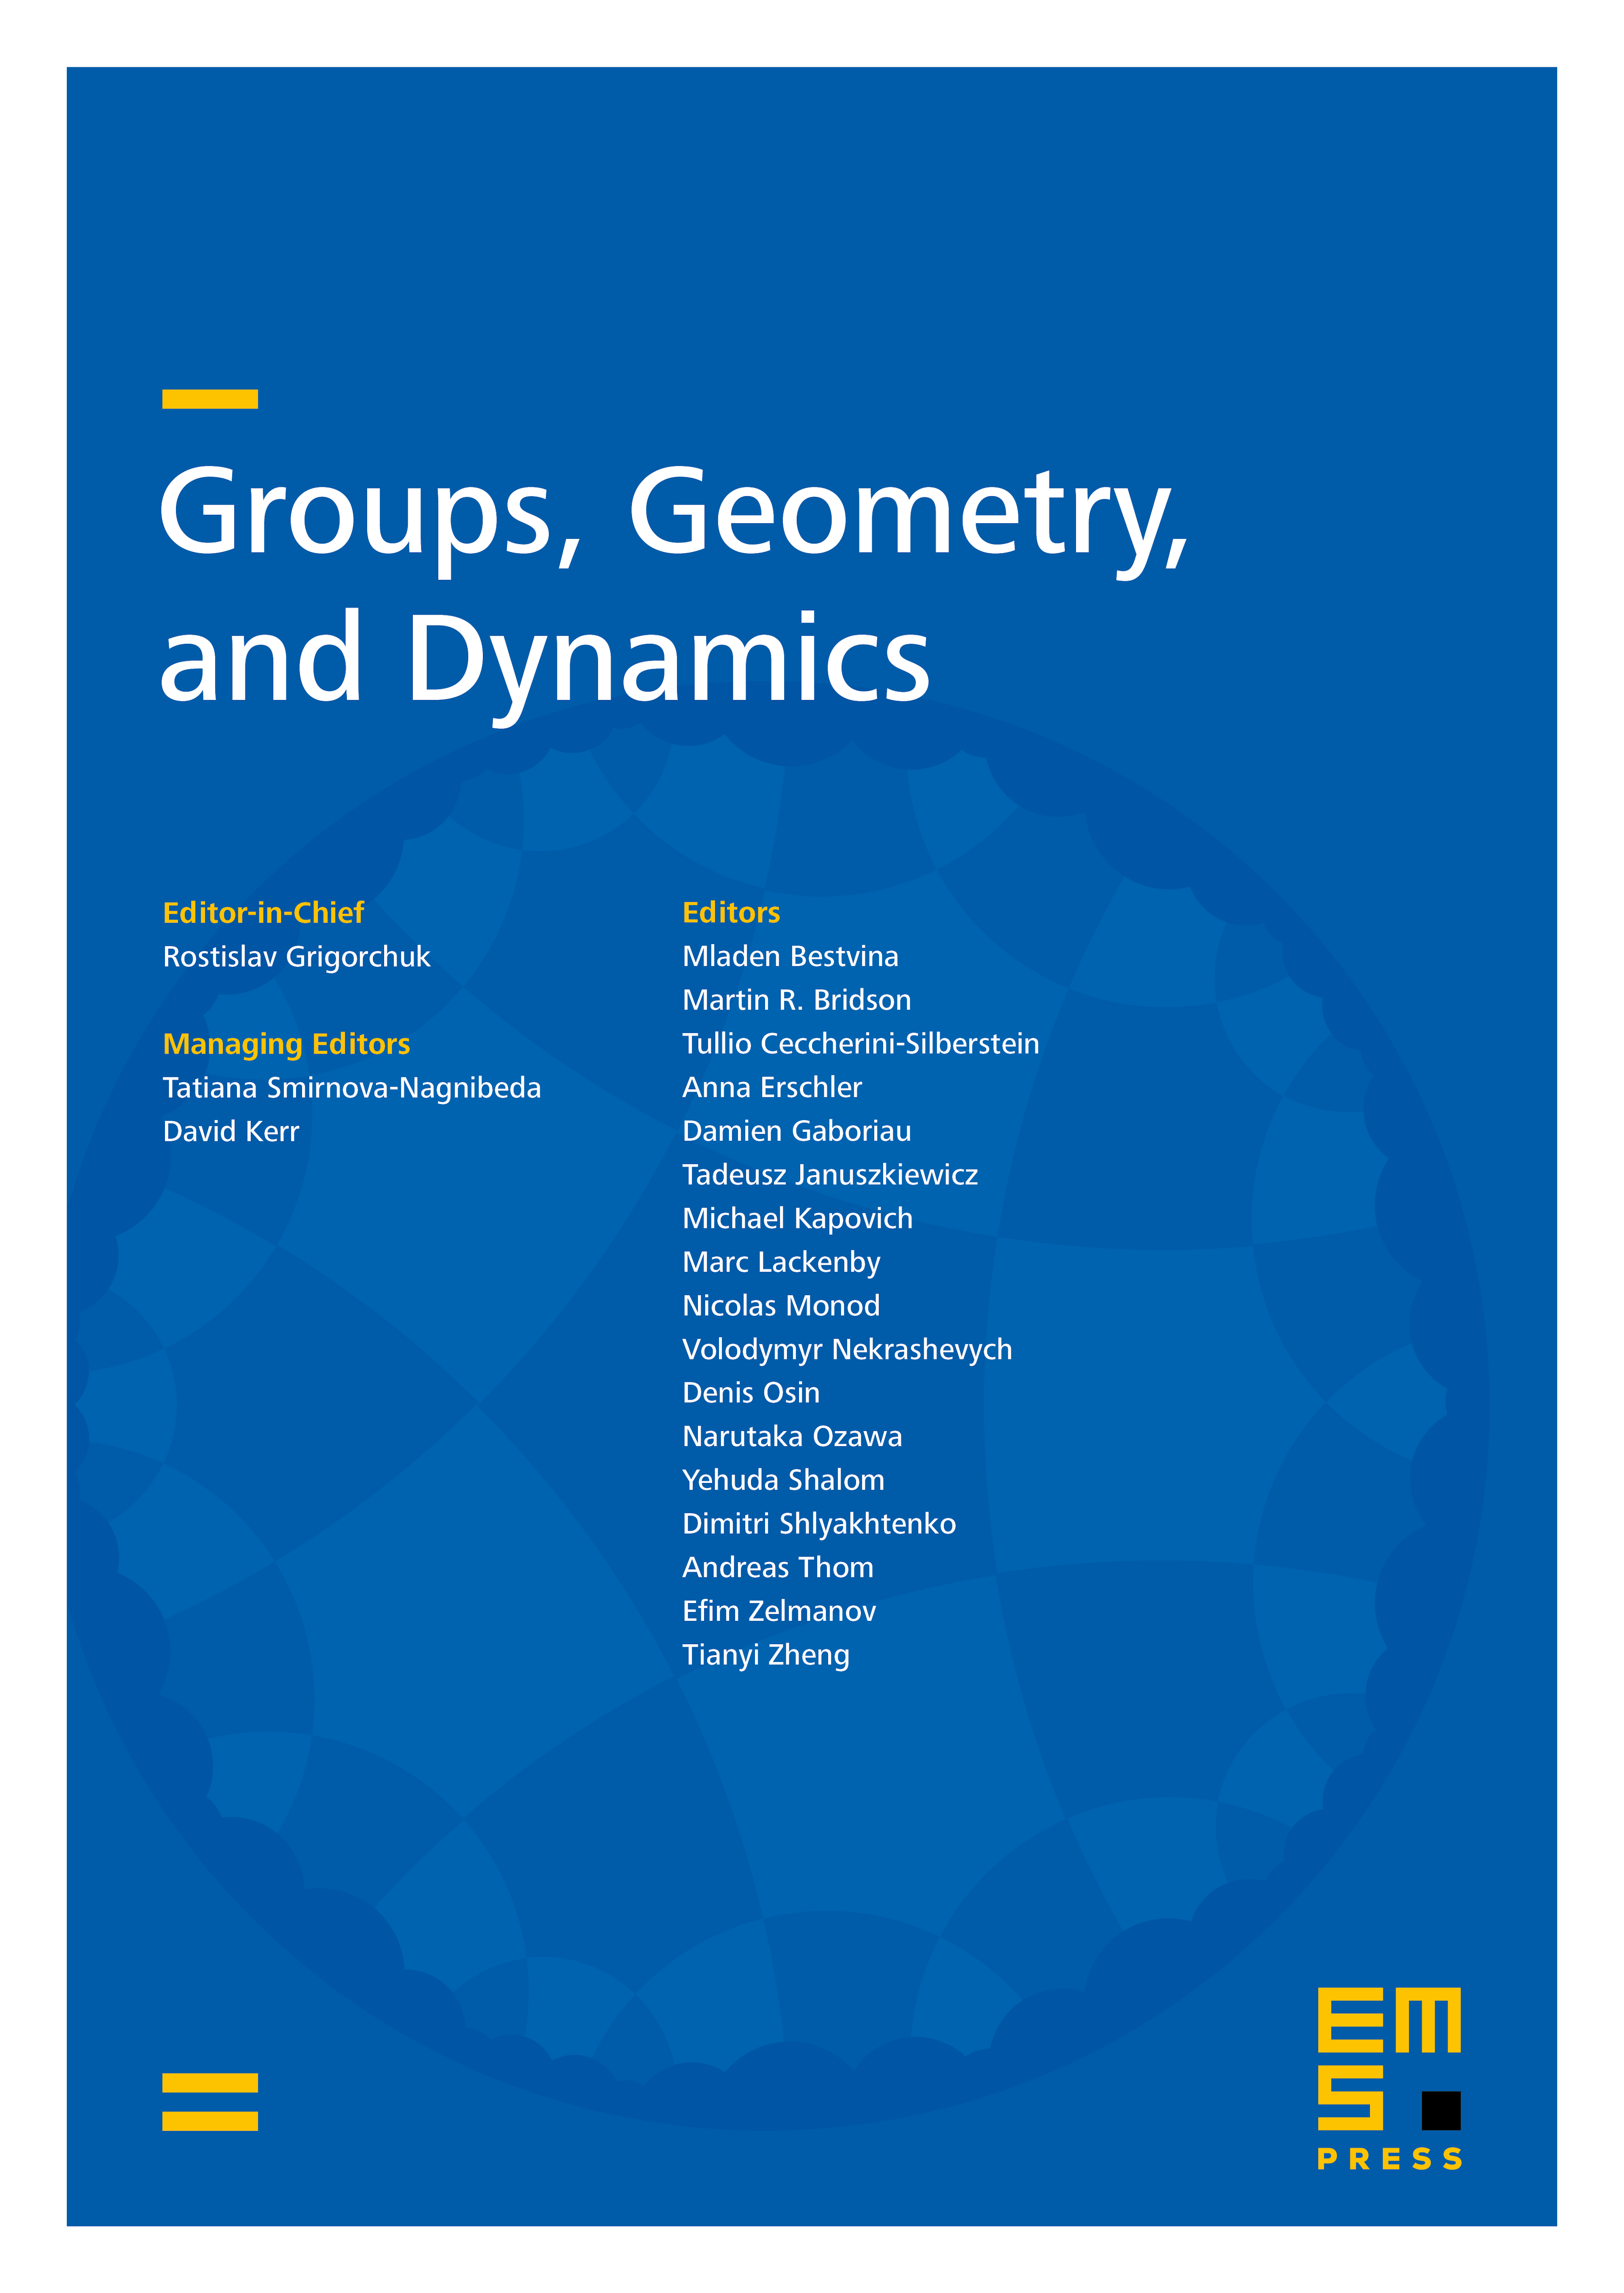 Conjugacy in Garside groups II: structure of the ultra summit set cover